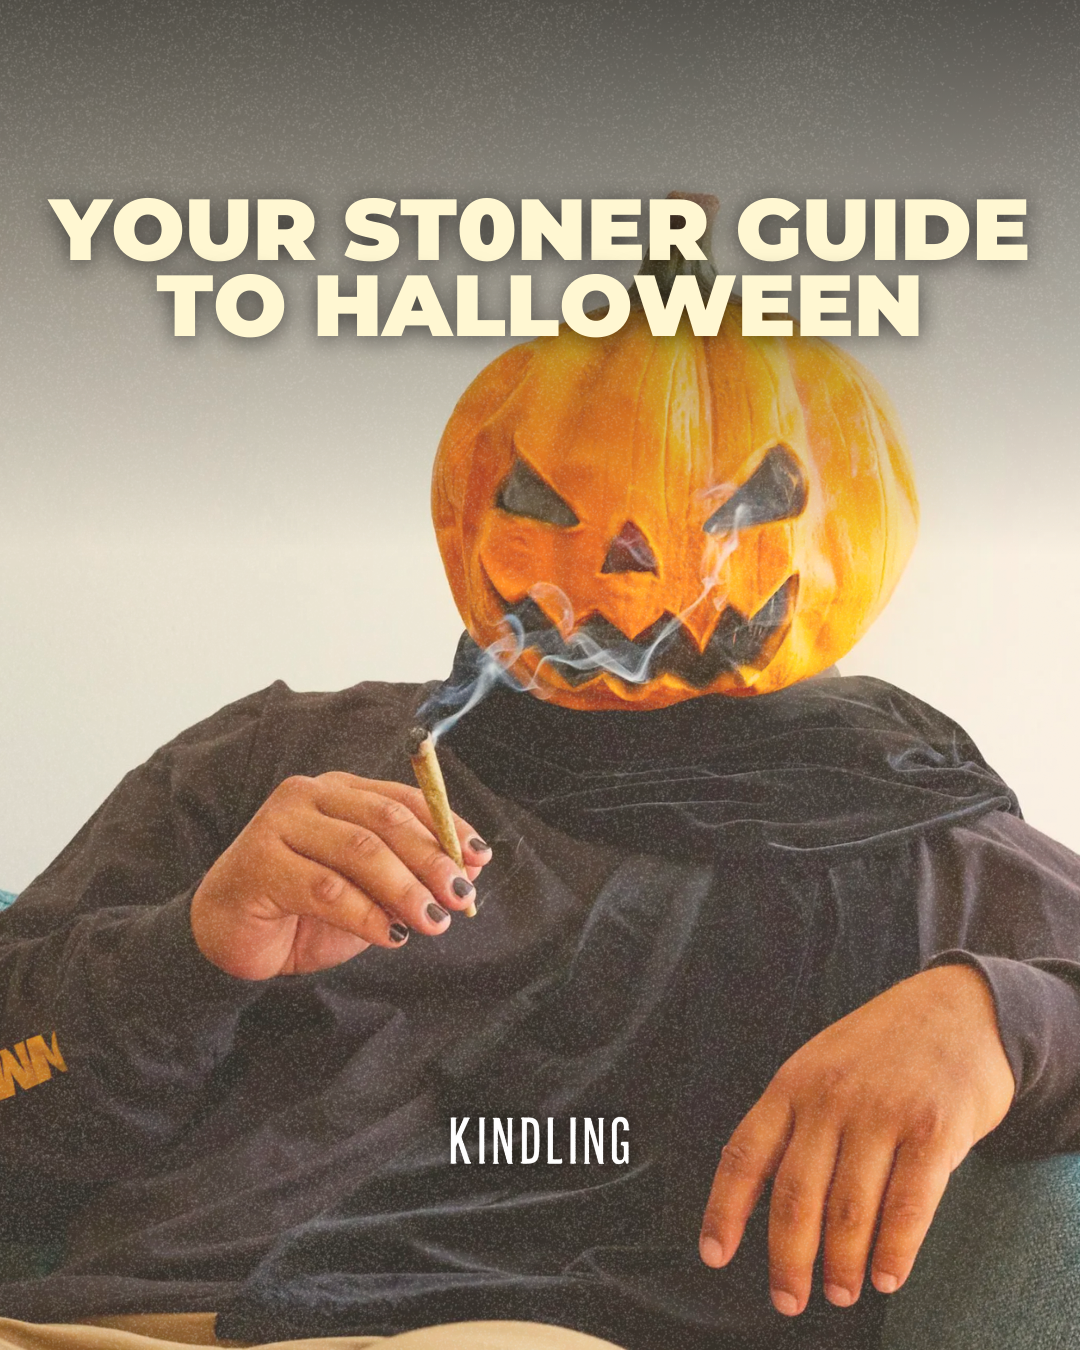 Your Stoner Guide to Halloween